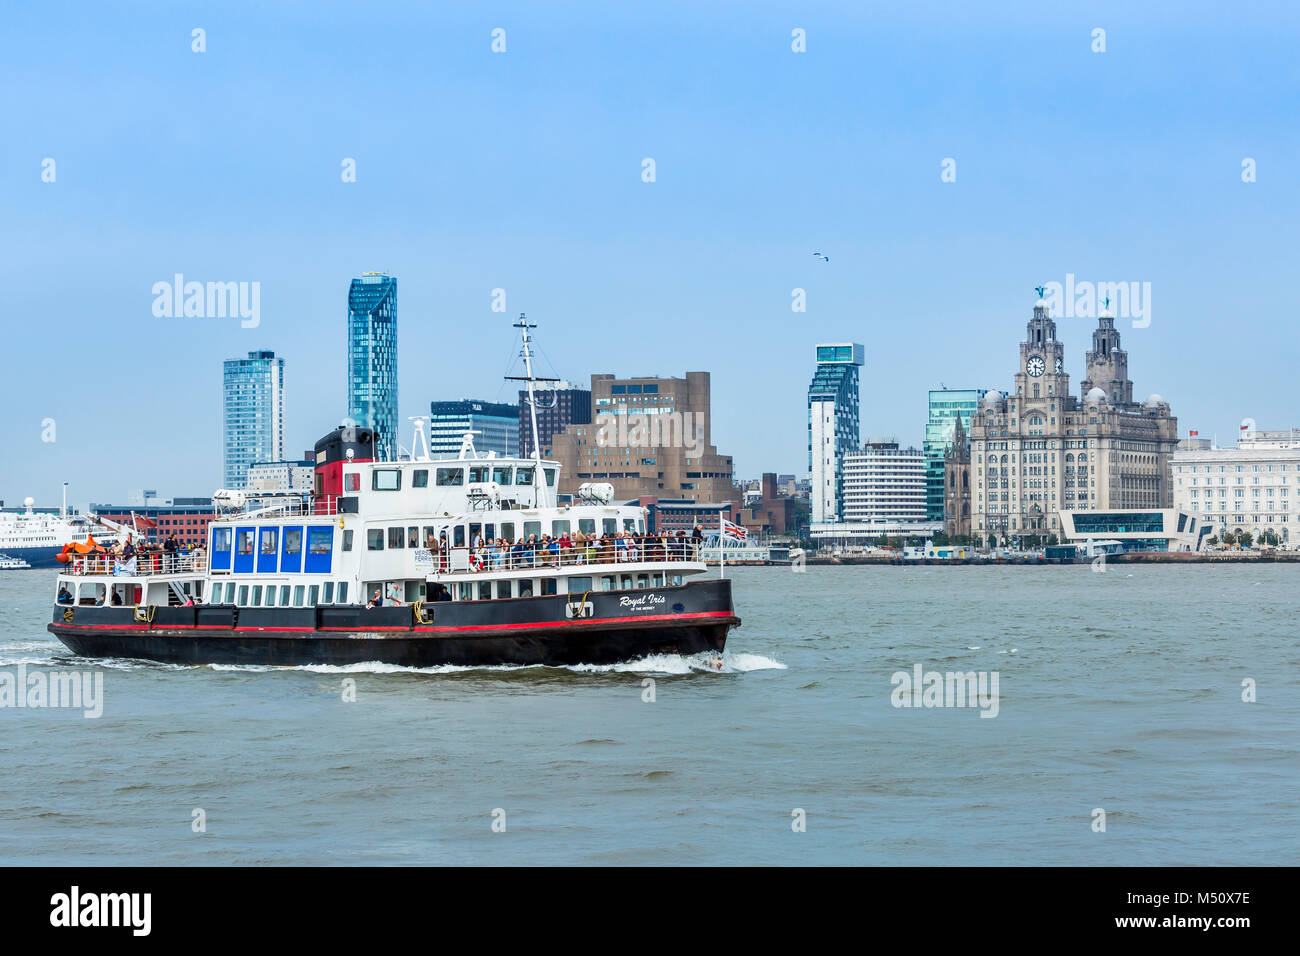 Mersey Ferry Royal Iris with Liverpool waterfront behind including the Royal Liver building. Stock Photo